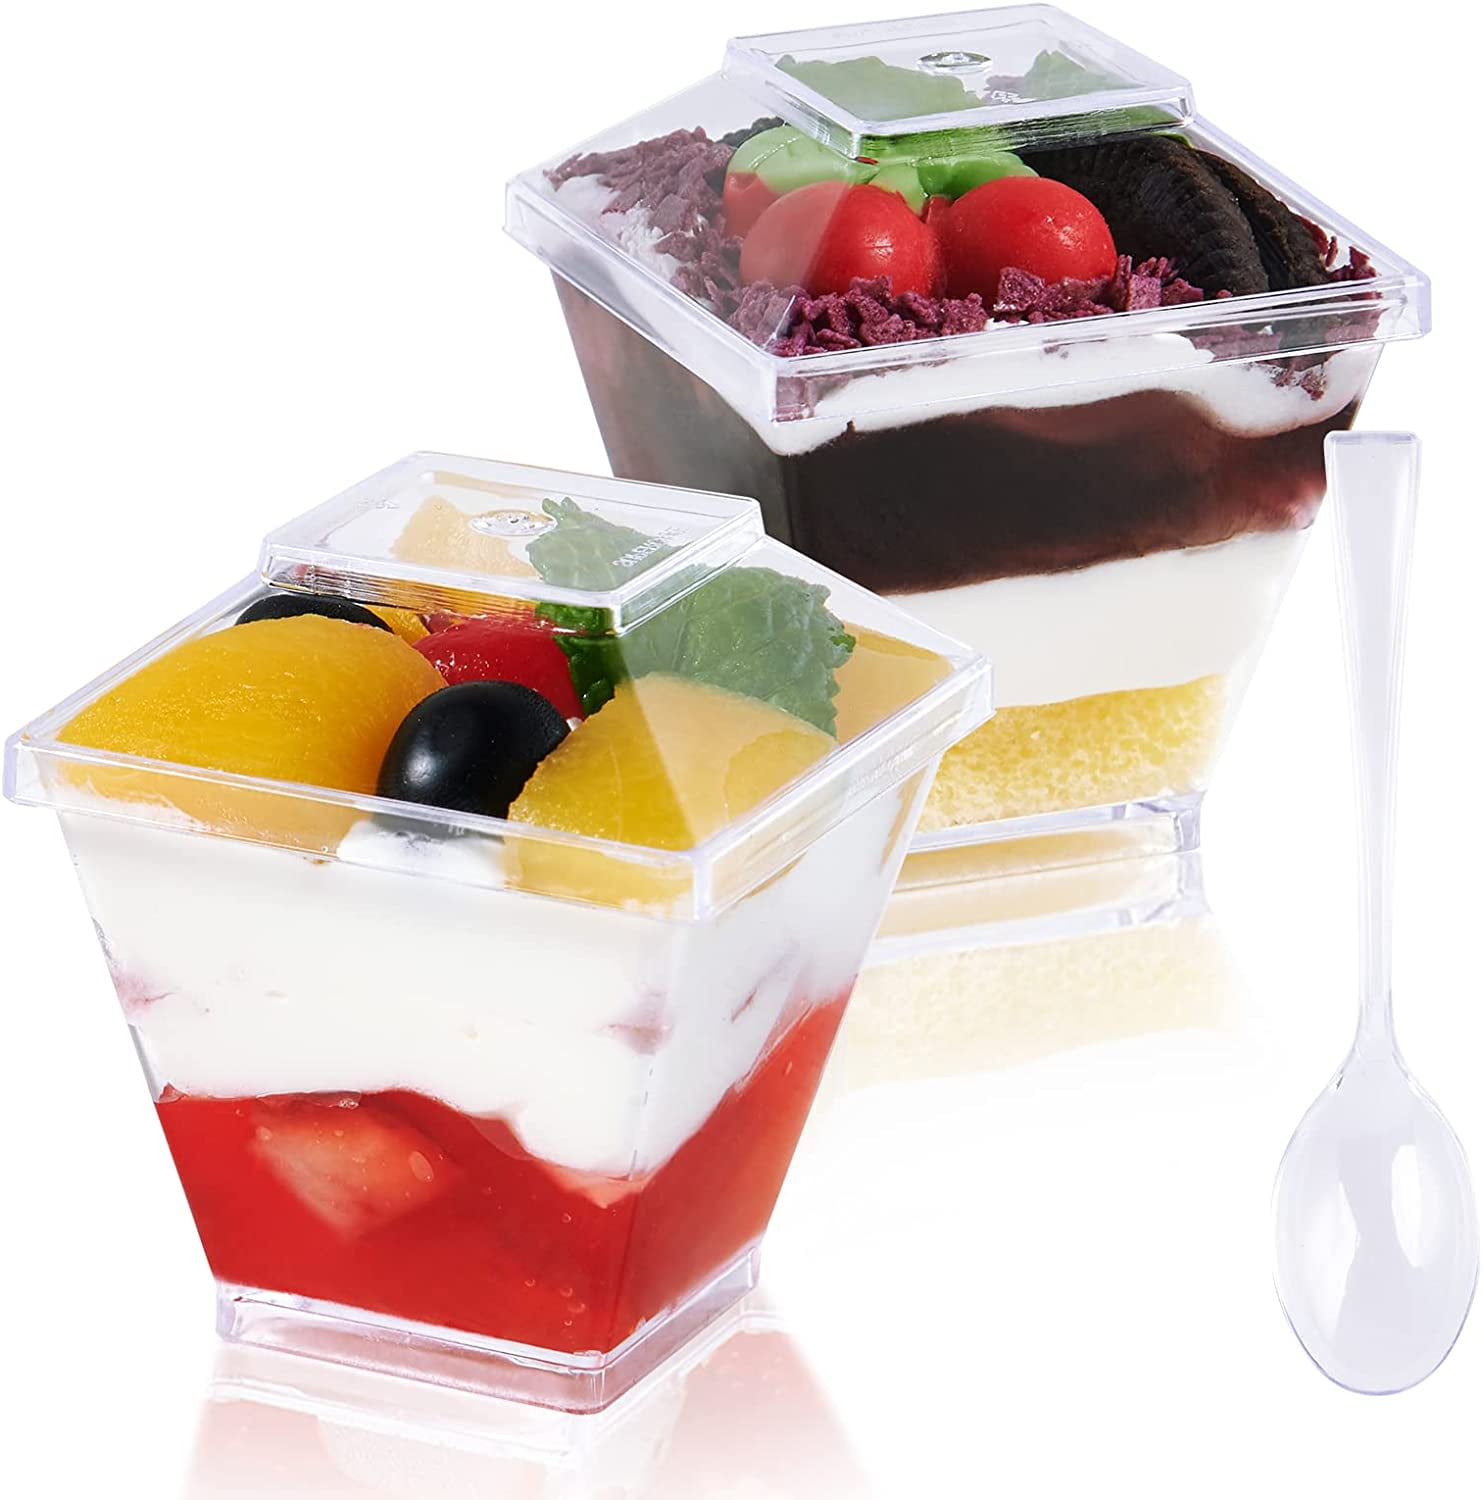 JuneHeart 60 Pcs Disposable Square Dessert Cups with Lids,8 oz Plastic  Fruit Cups with Lid Parfait Cups for Party,Wedding,Mousse and Banana  Pudding.